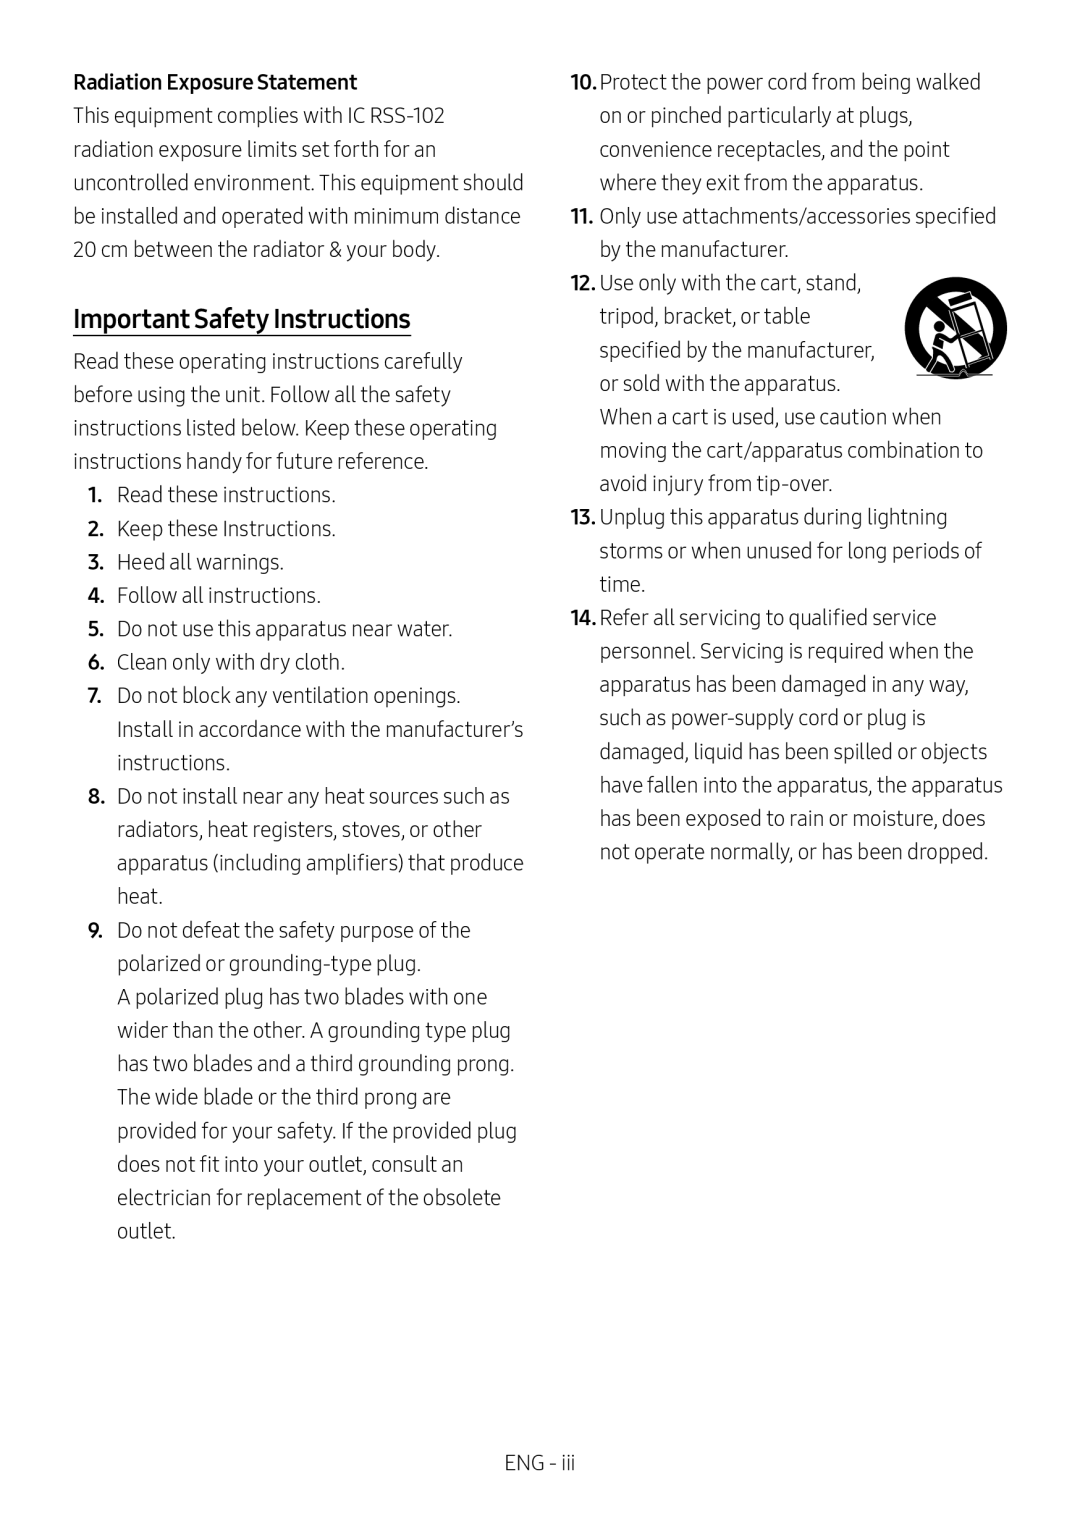 Important Safety Instructions Standard HW-R47M